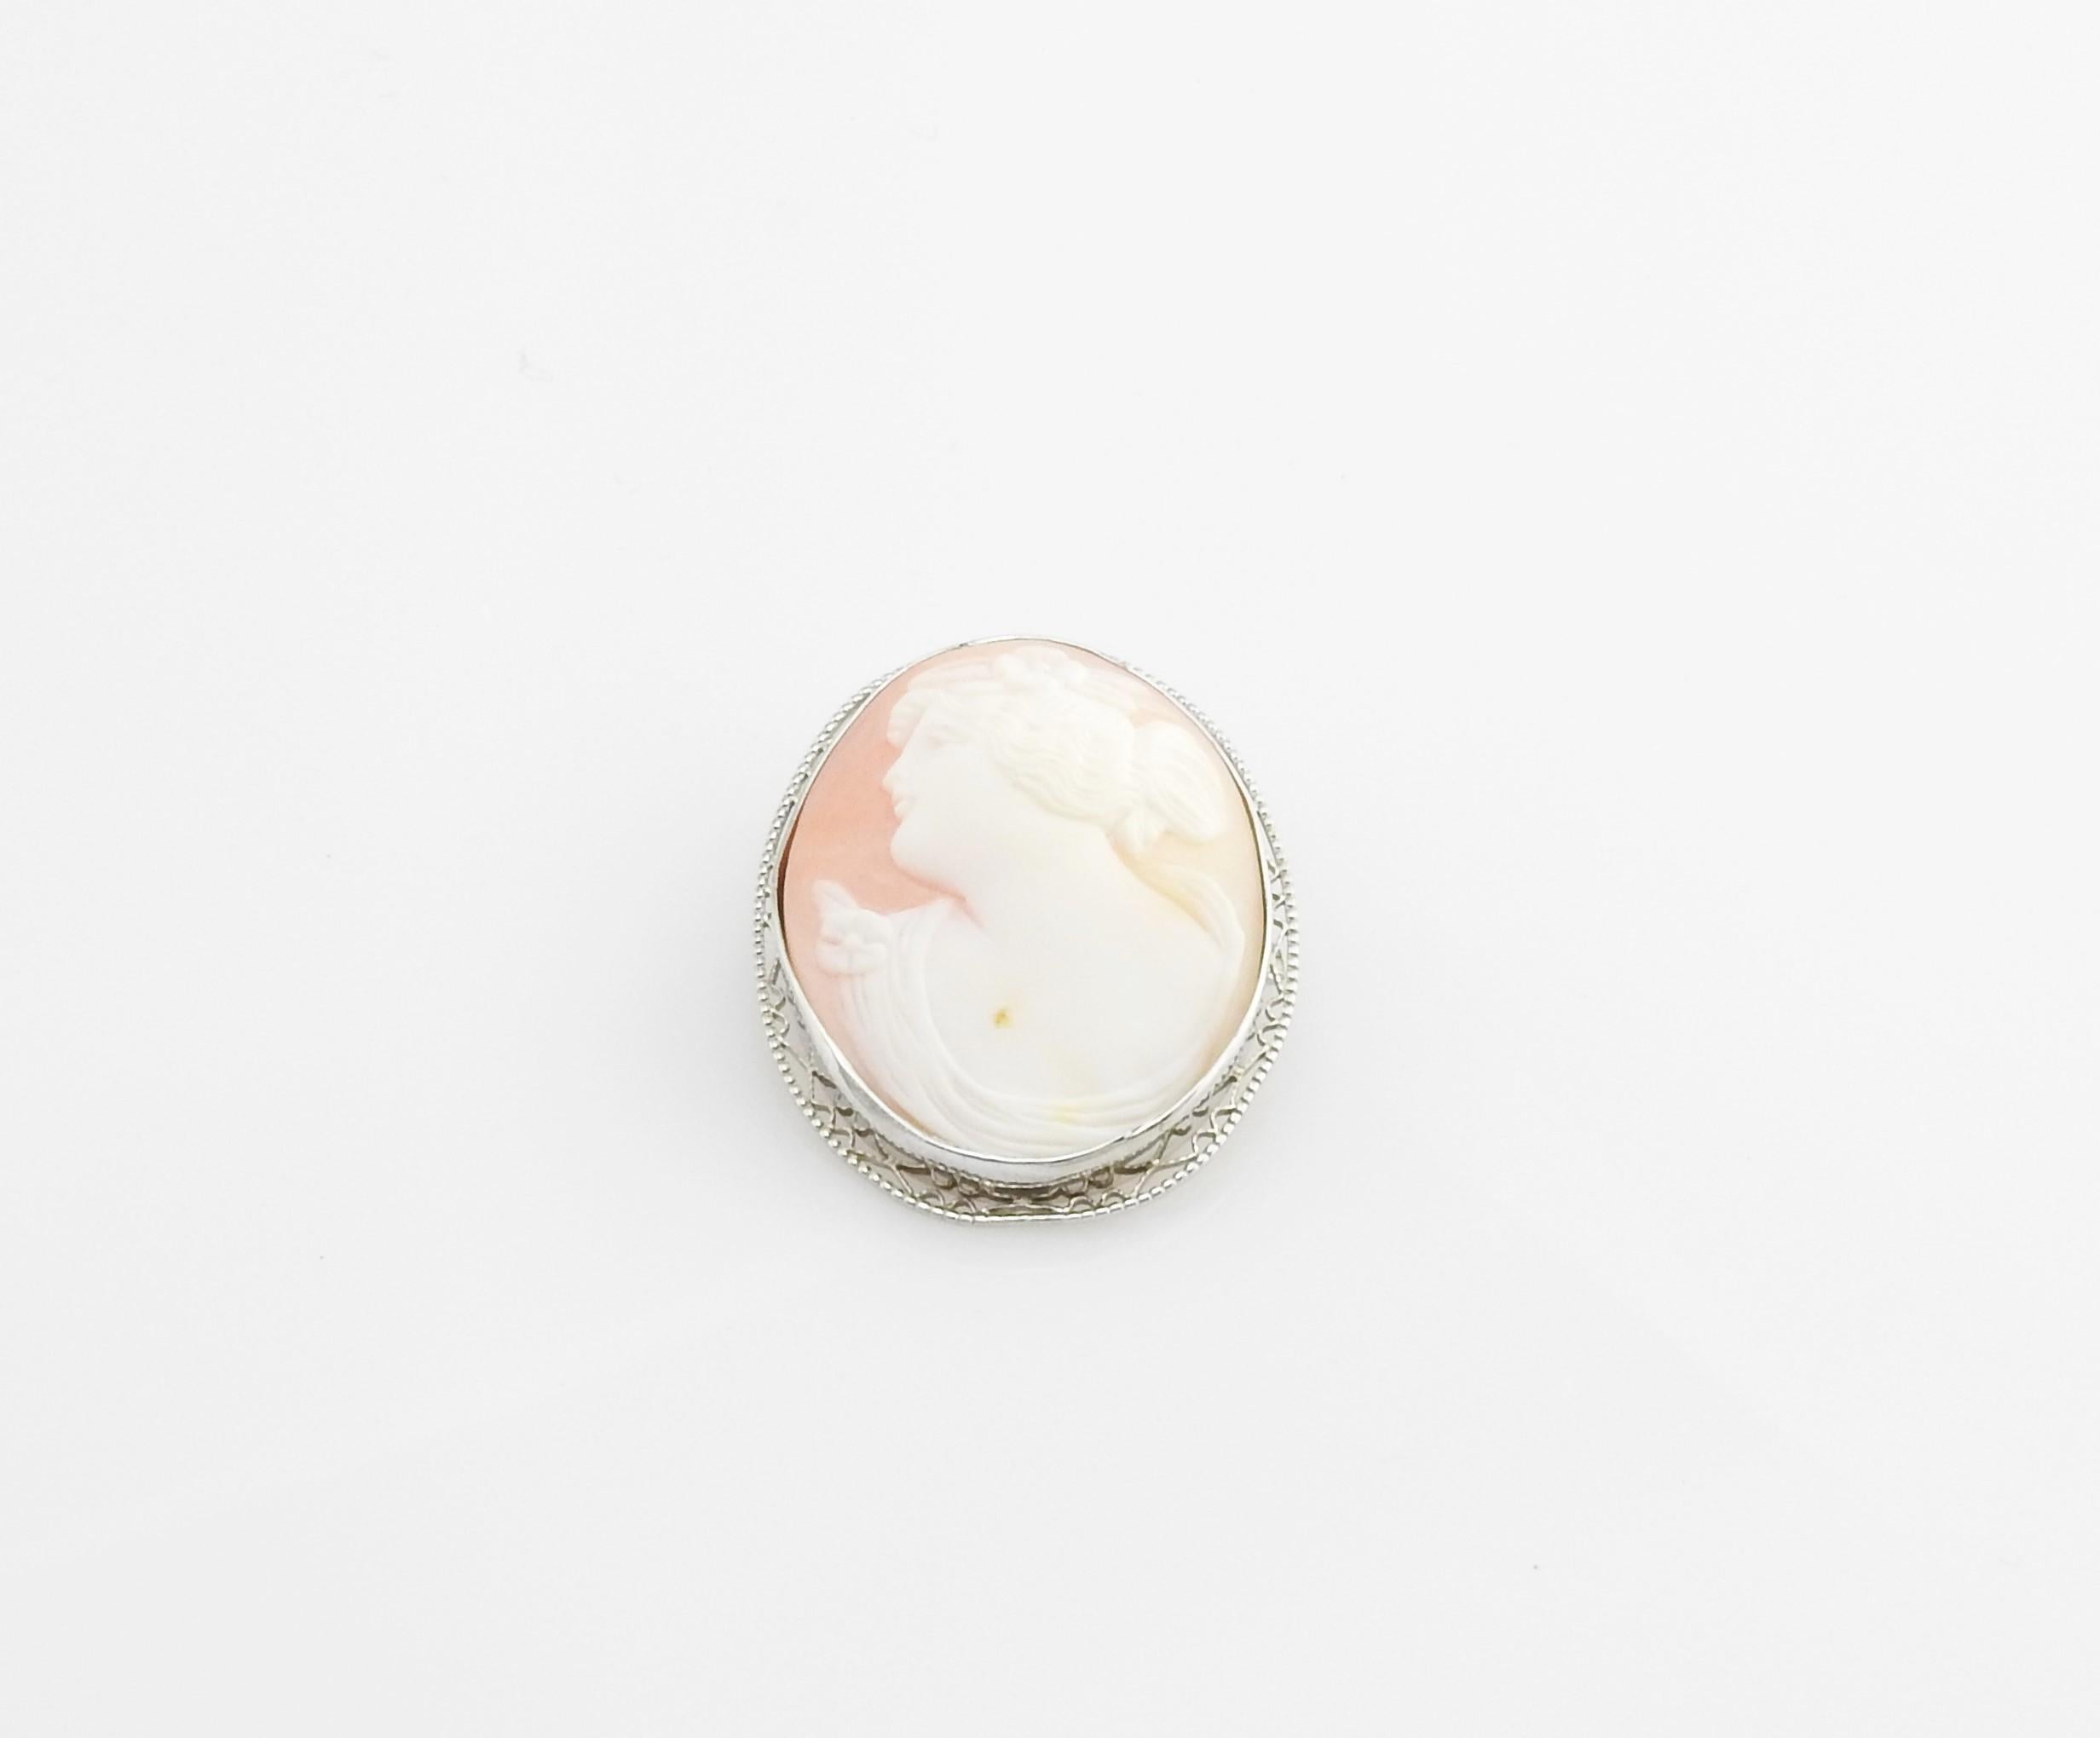 10 Karat White Gold Cameo Brooch / Pin For Sale 5